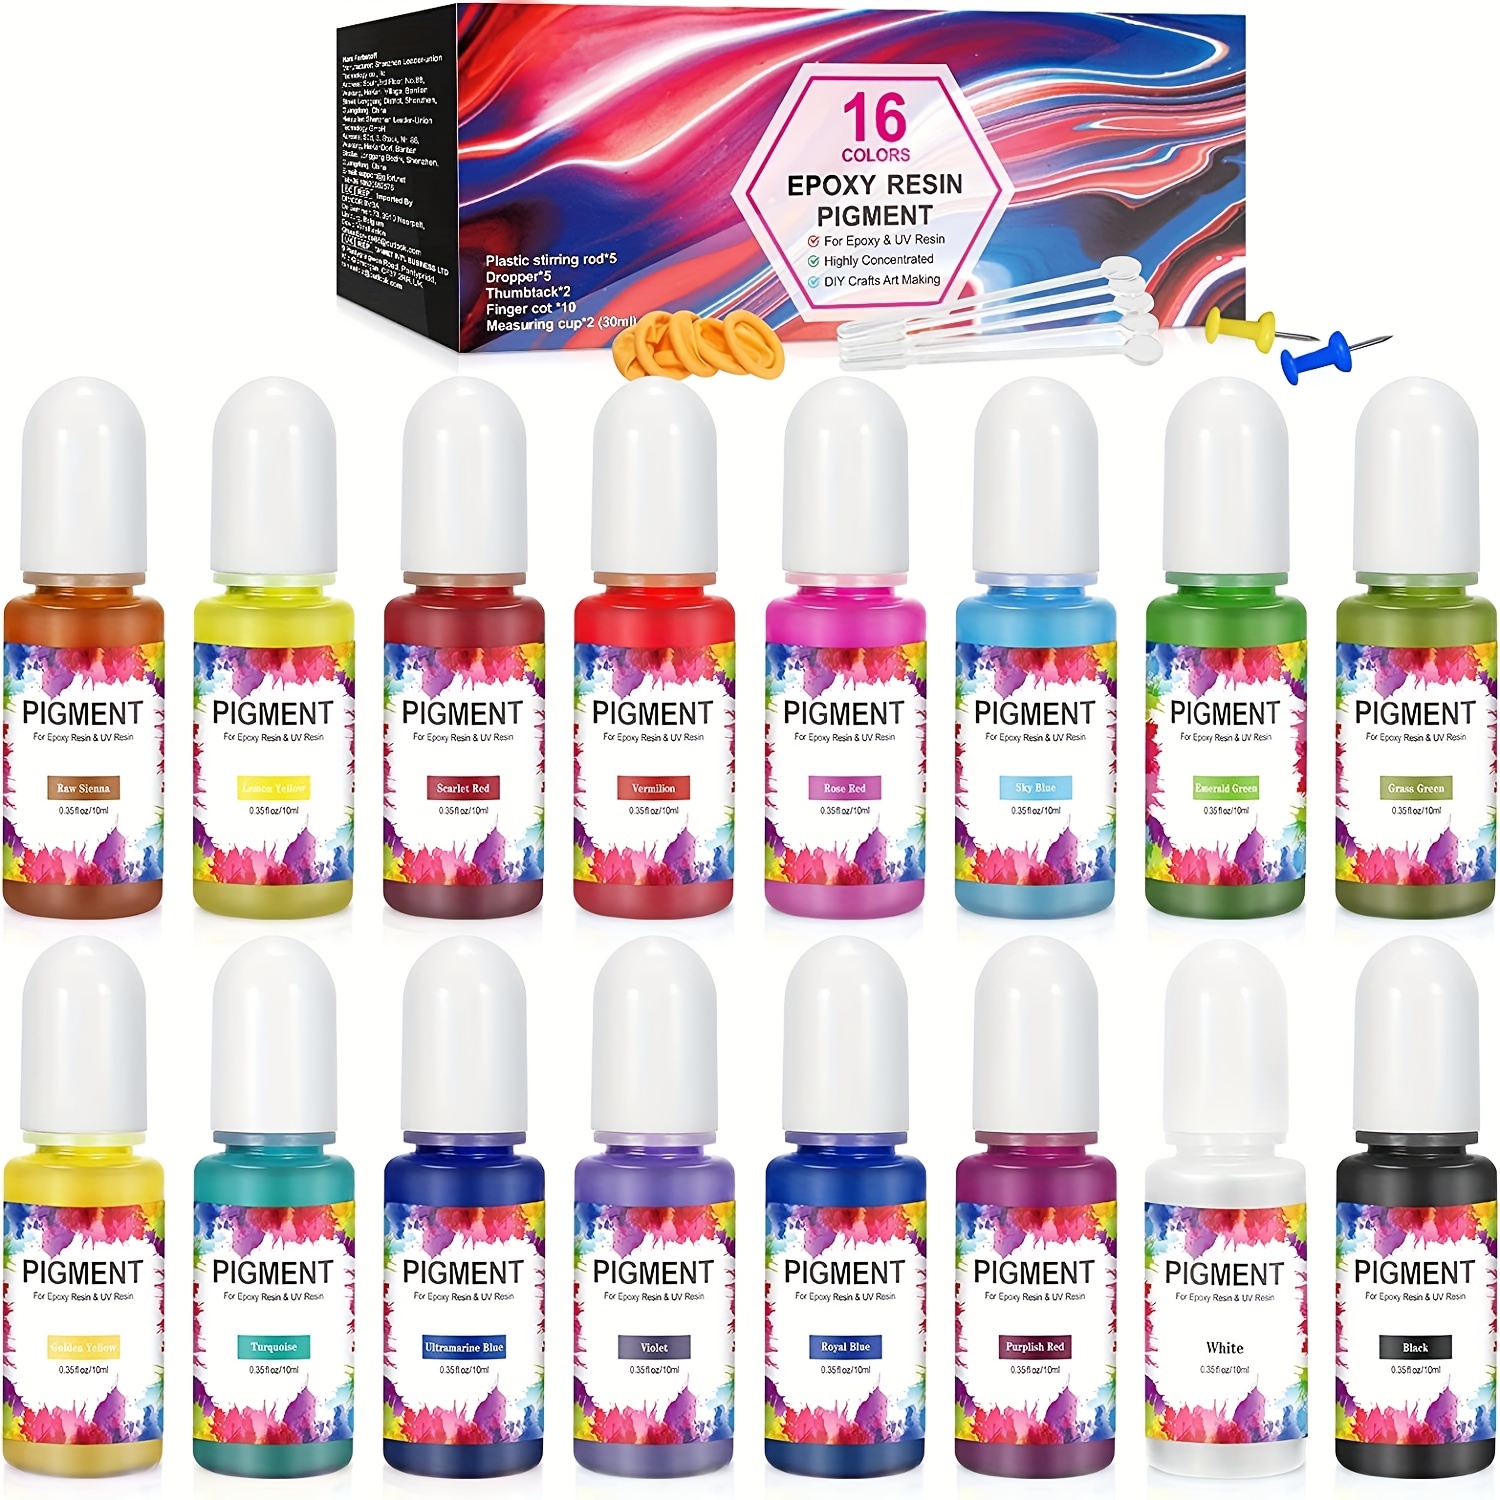 16 Colors Epoxy Resin Pigment Liquid Dye High Concentrated Resin